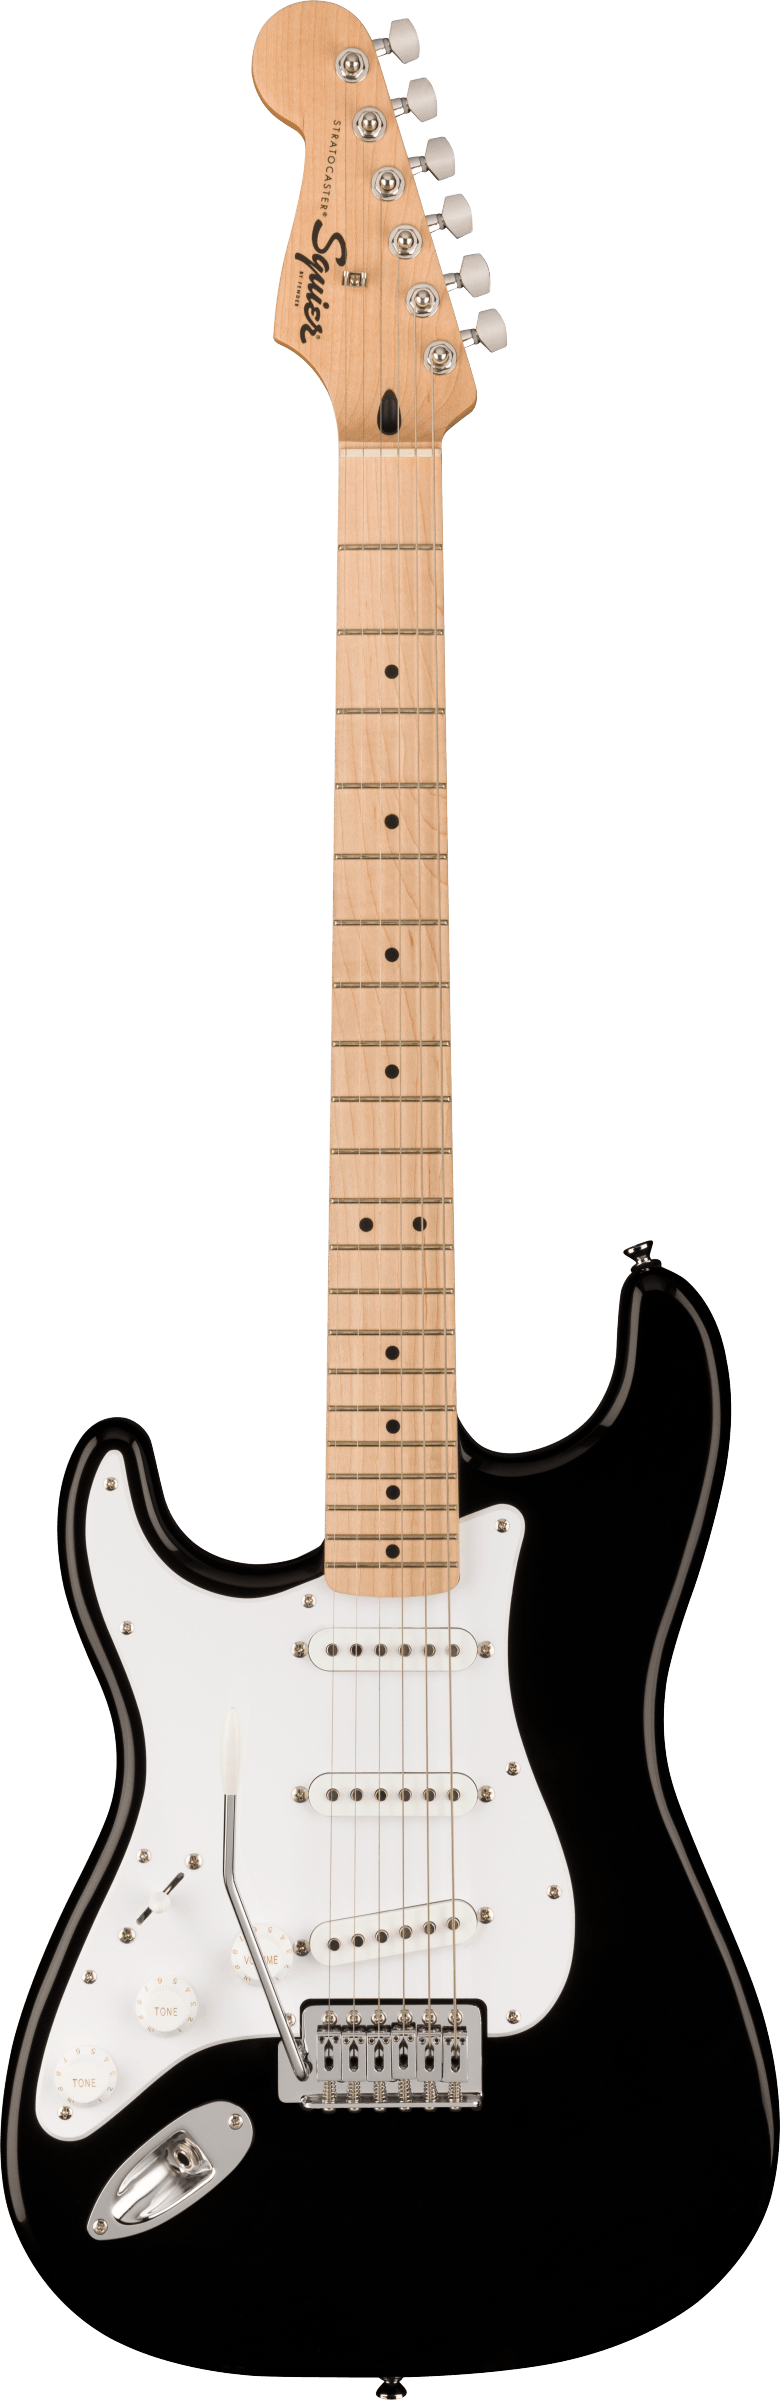 Squier Sonic® Stratocaster® Lefty in Black